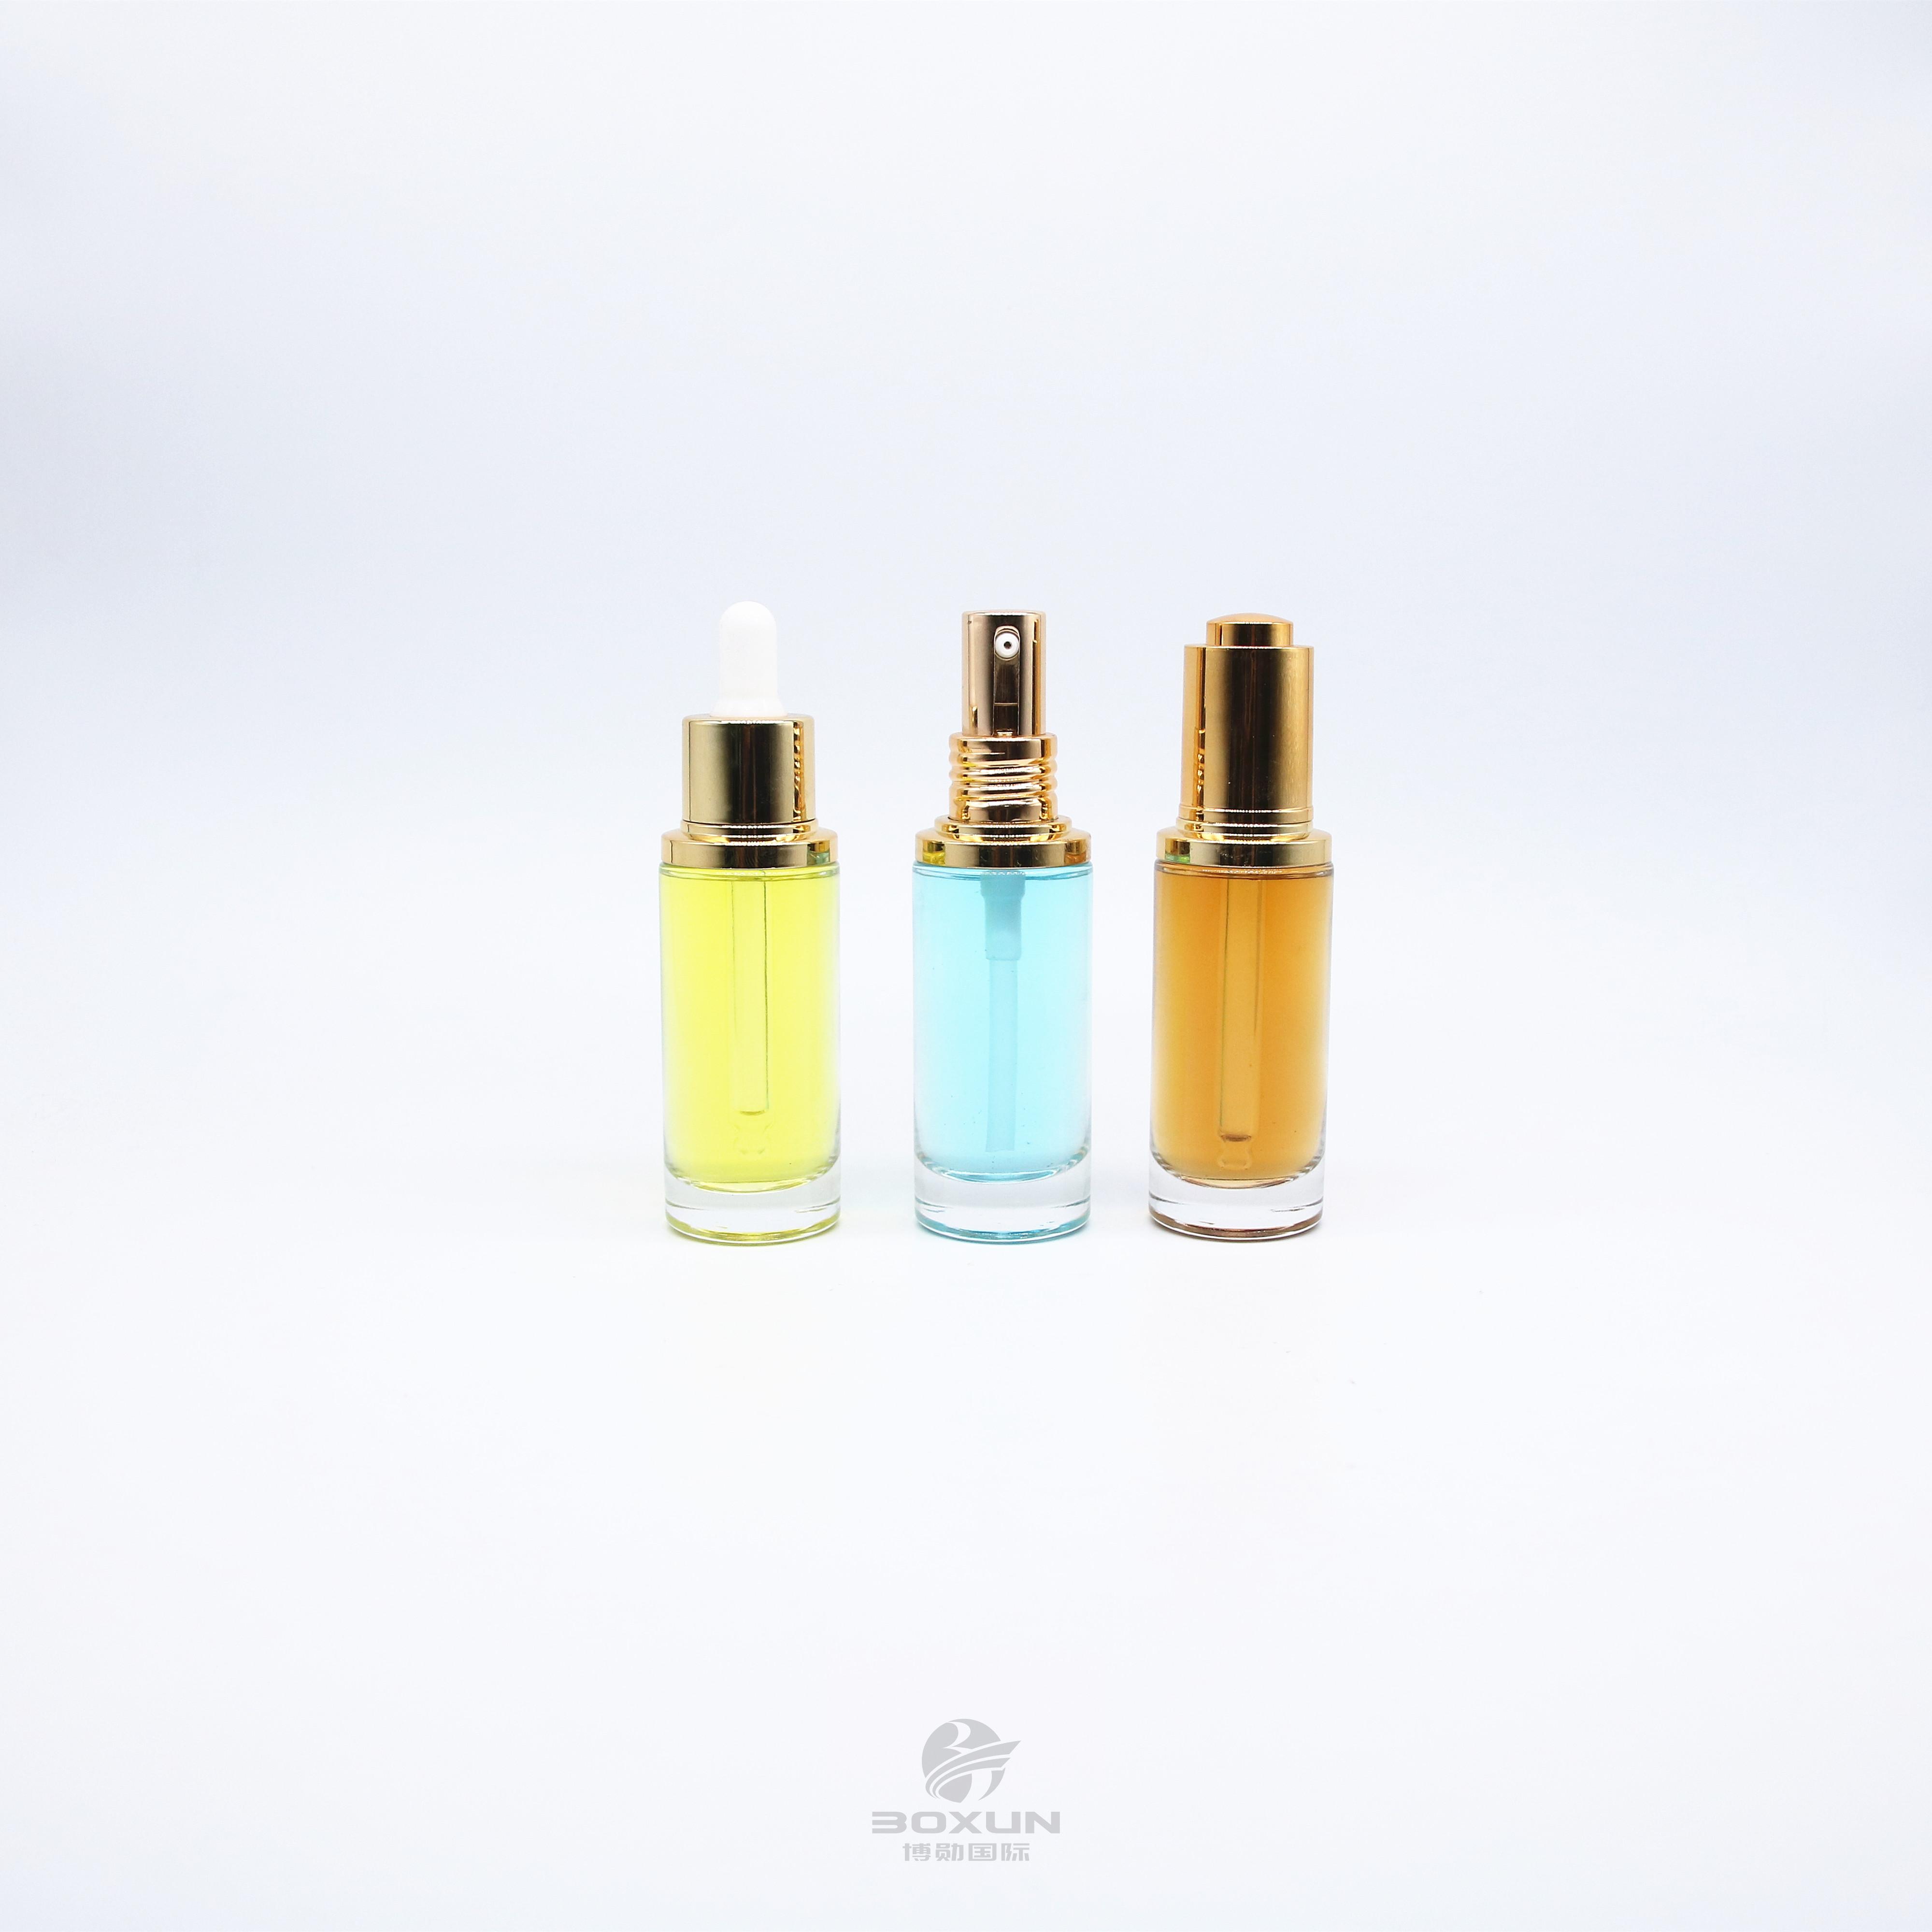 30ml40ml50ml glass lotion bottle dropper bottle perfume bottle small sample bottle can be customized can be used with pump head spray dropper pressure pump dropper rotary pressure pump dropper